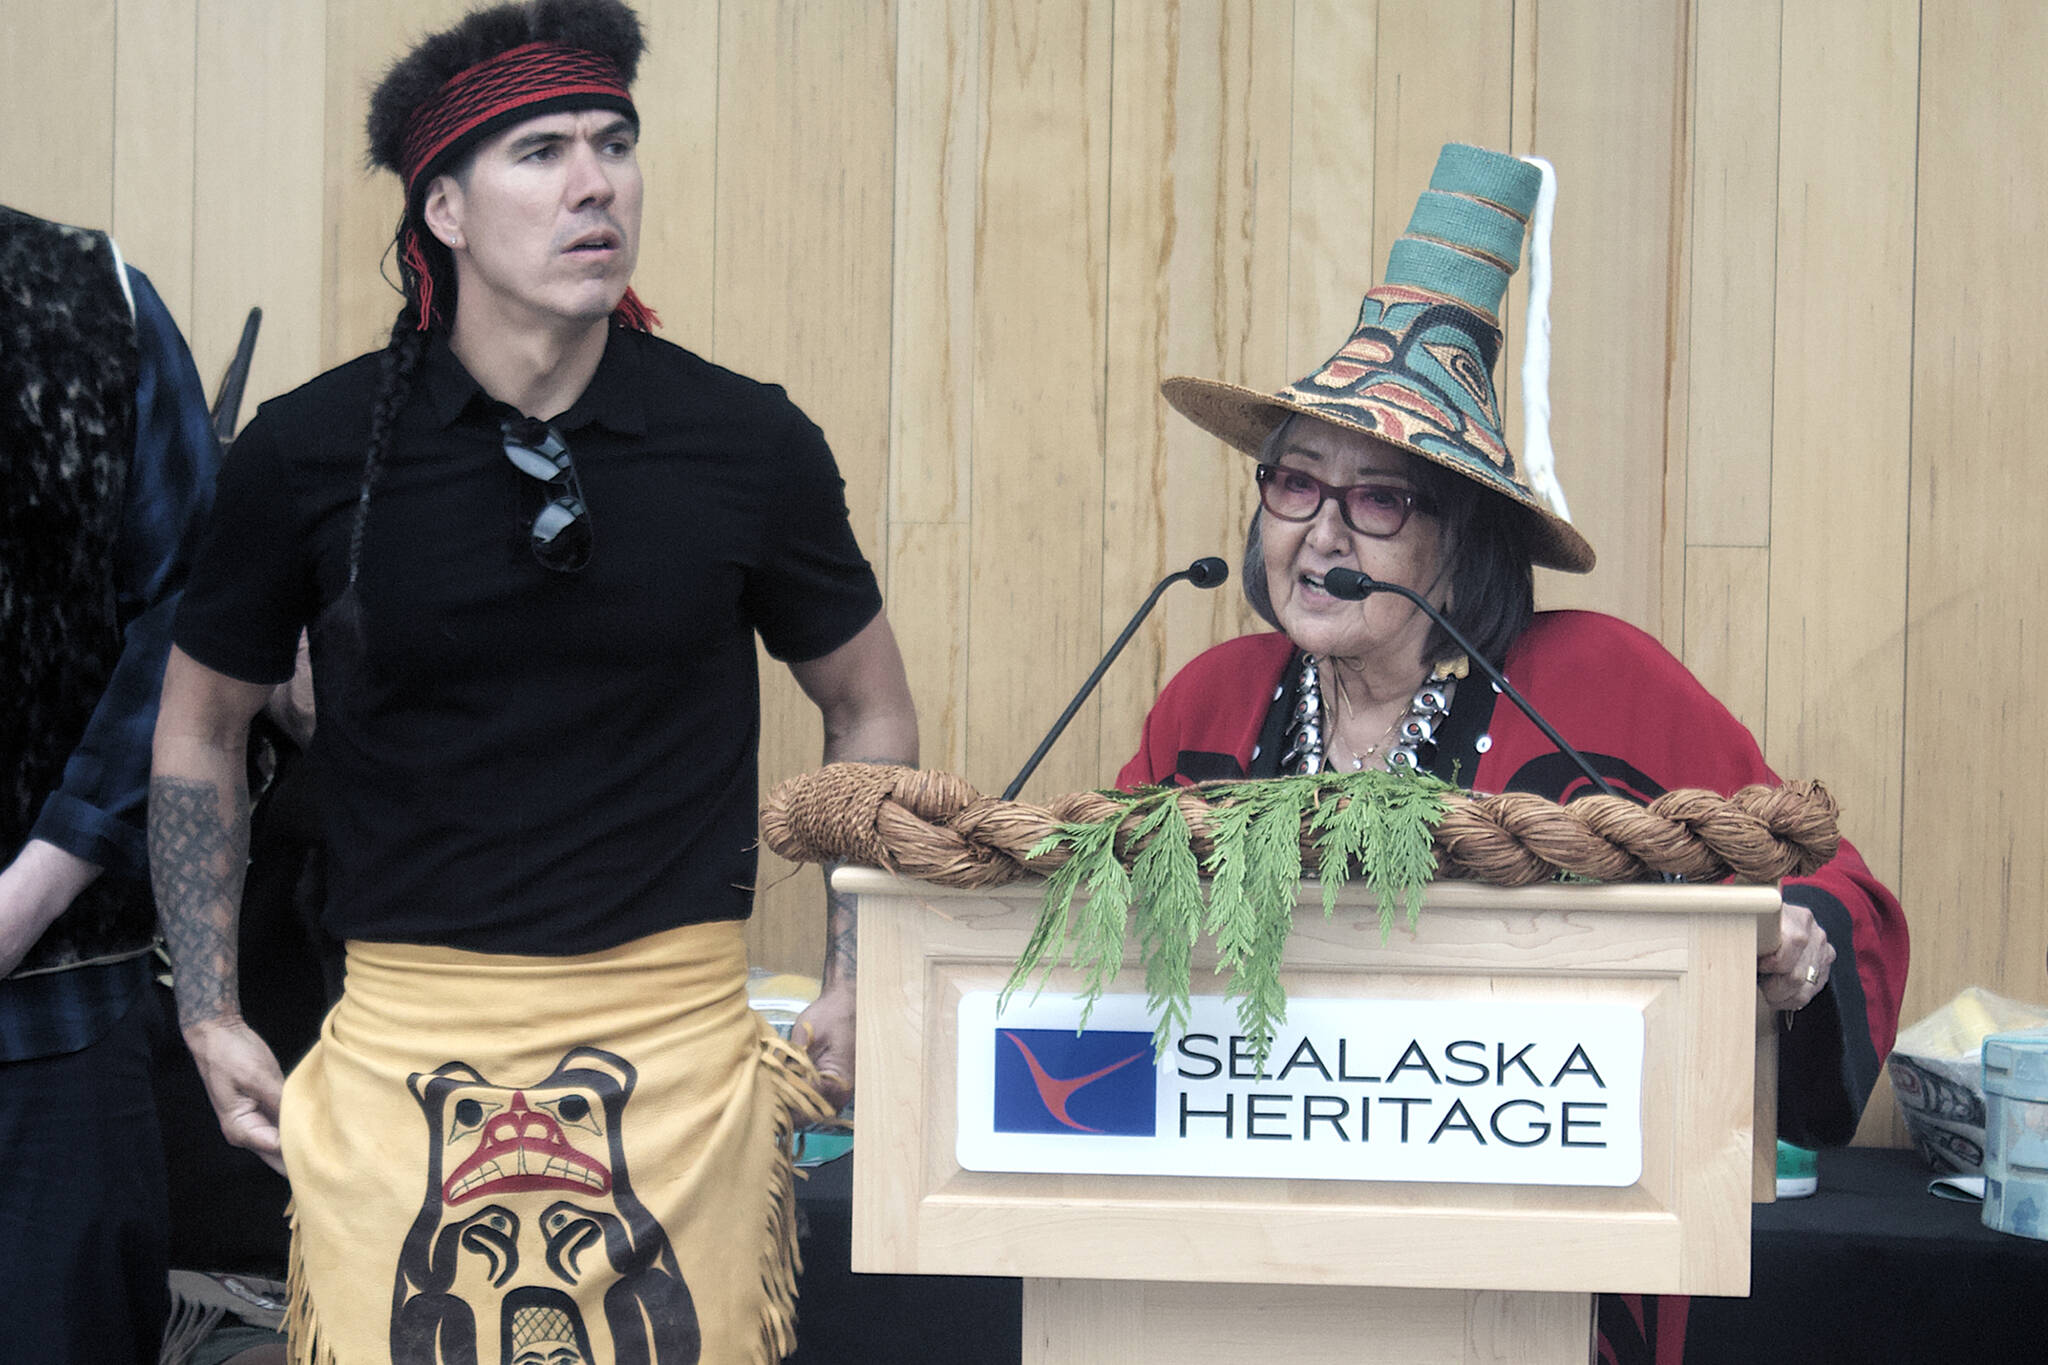 Mark Sabbatini / Juneau Empire
Haida artist TJ Young (Sgwaayaans), left, master carver of Alaska’s first 360-degree totem that was part of Wednesday’s debut of the Sealaska Heritage Arts Campus, is congratulated for his work by Rosita Kaaháni Worl, president of Sealaska Heritage Institute and moderator of the ceremony. The midday gathering marked the beginning of Celebration, which is returning to Juneau as an in-person event for the first time in four years after the COVID-19 pandemic forced organiziers to turn it into a virtual event.